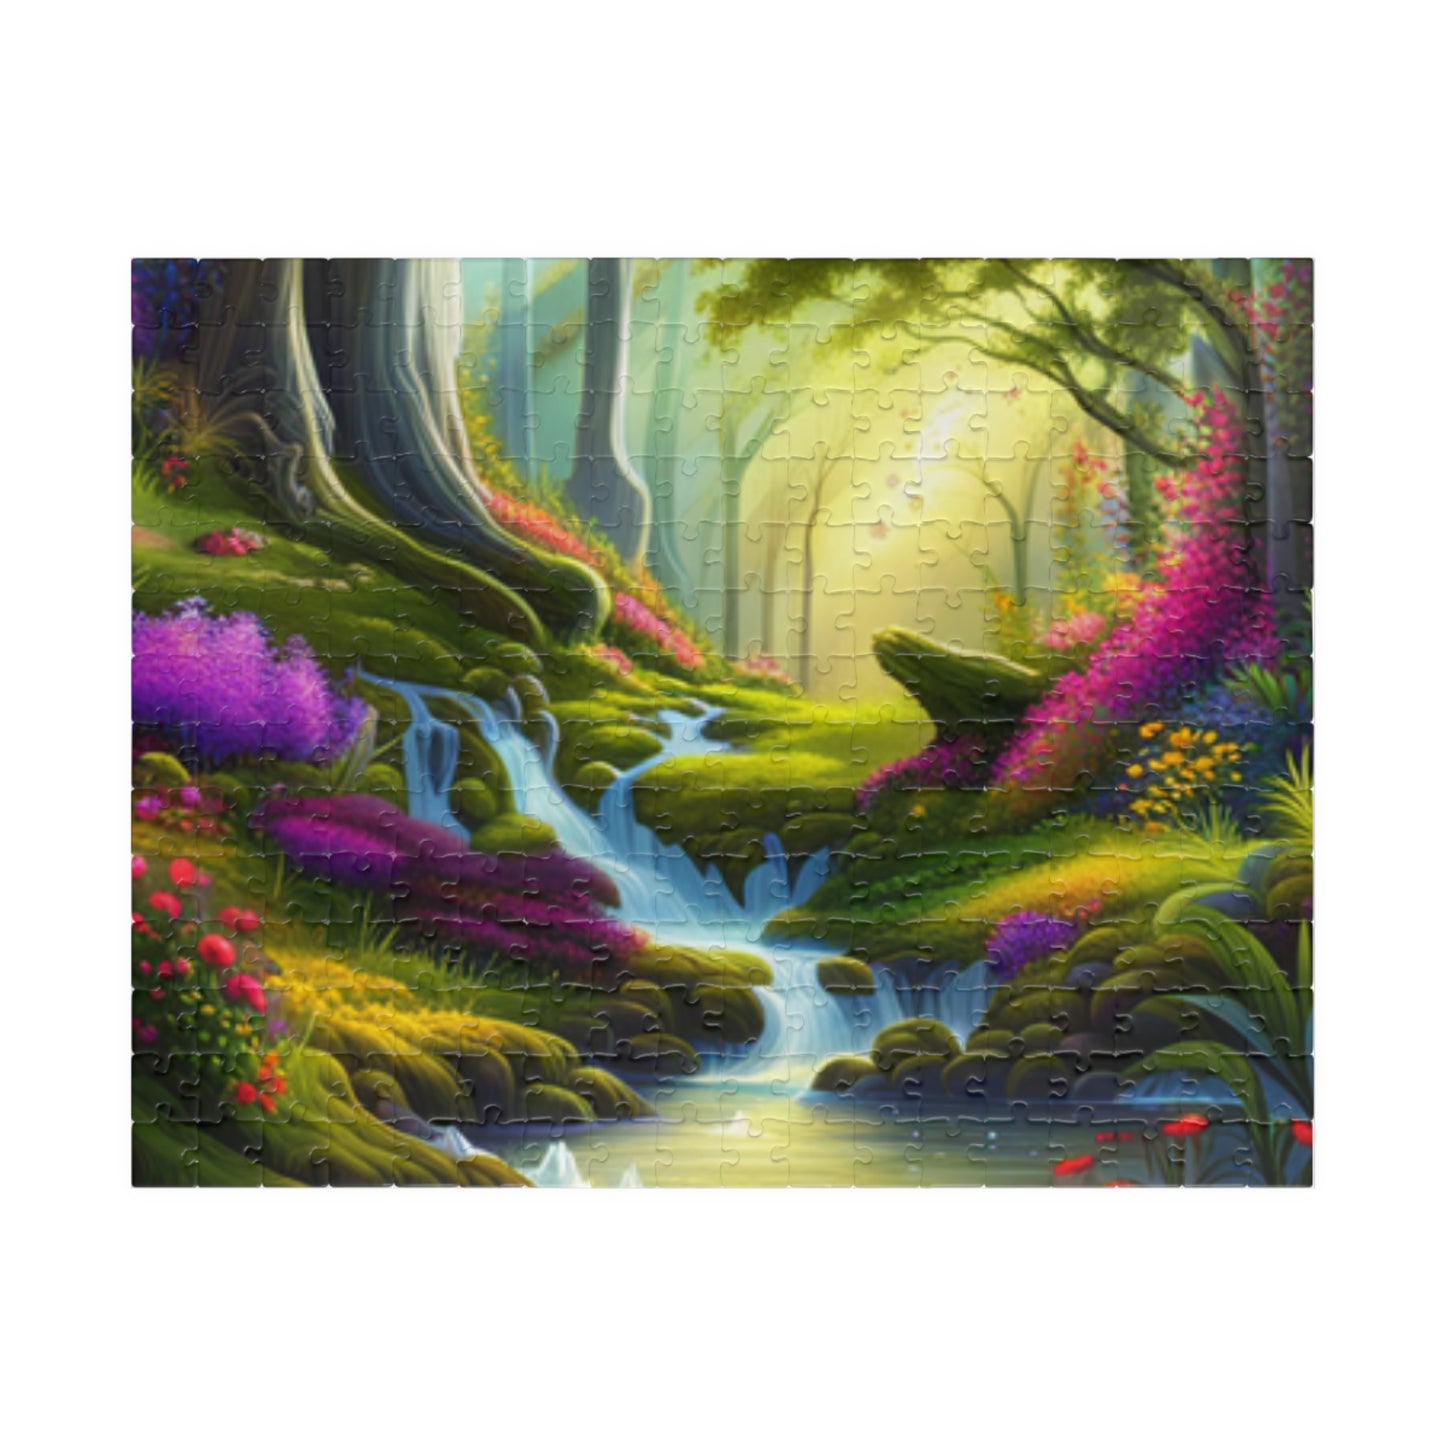 Puzzle (110, 252, 520, 1014-piece) - Stream In A Forest Puzzle, Glossy Finish